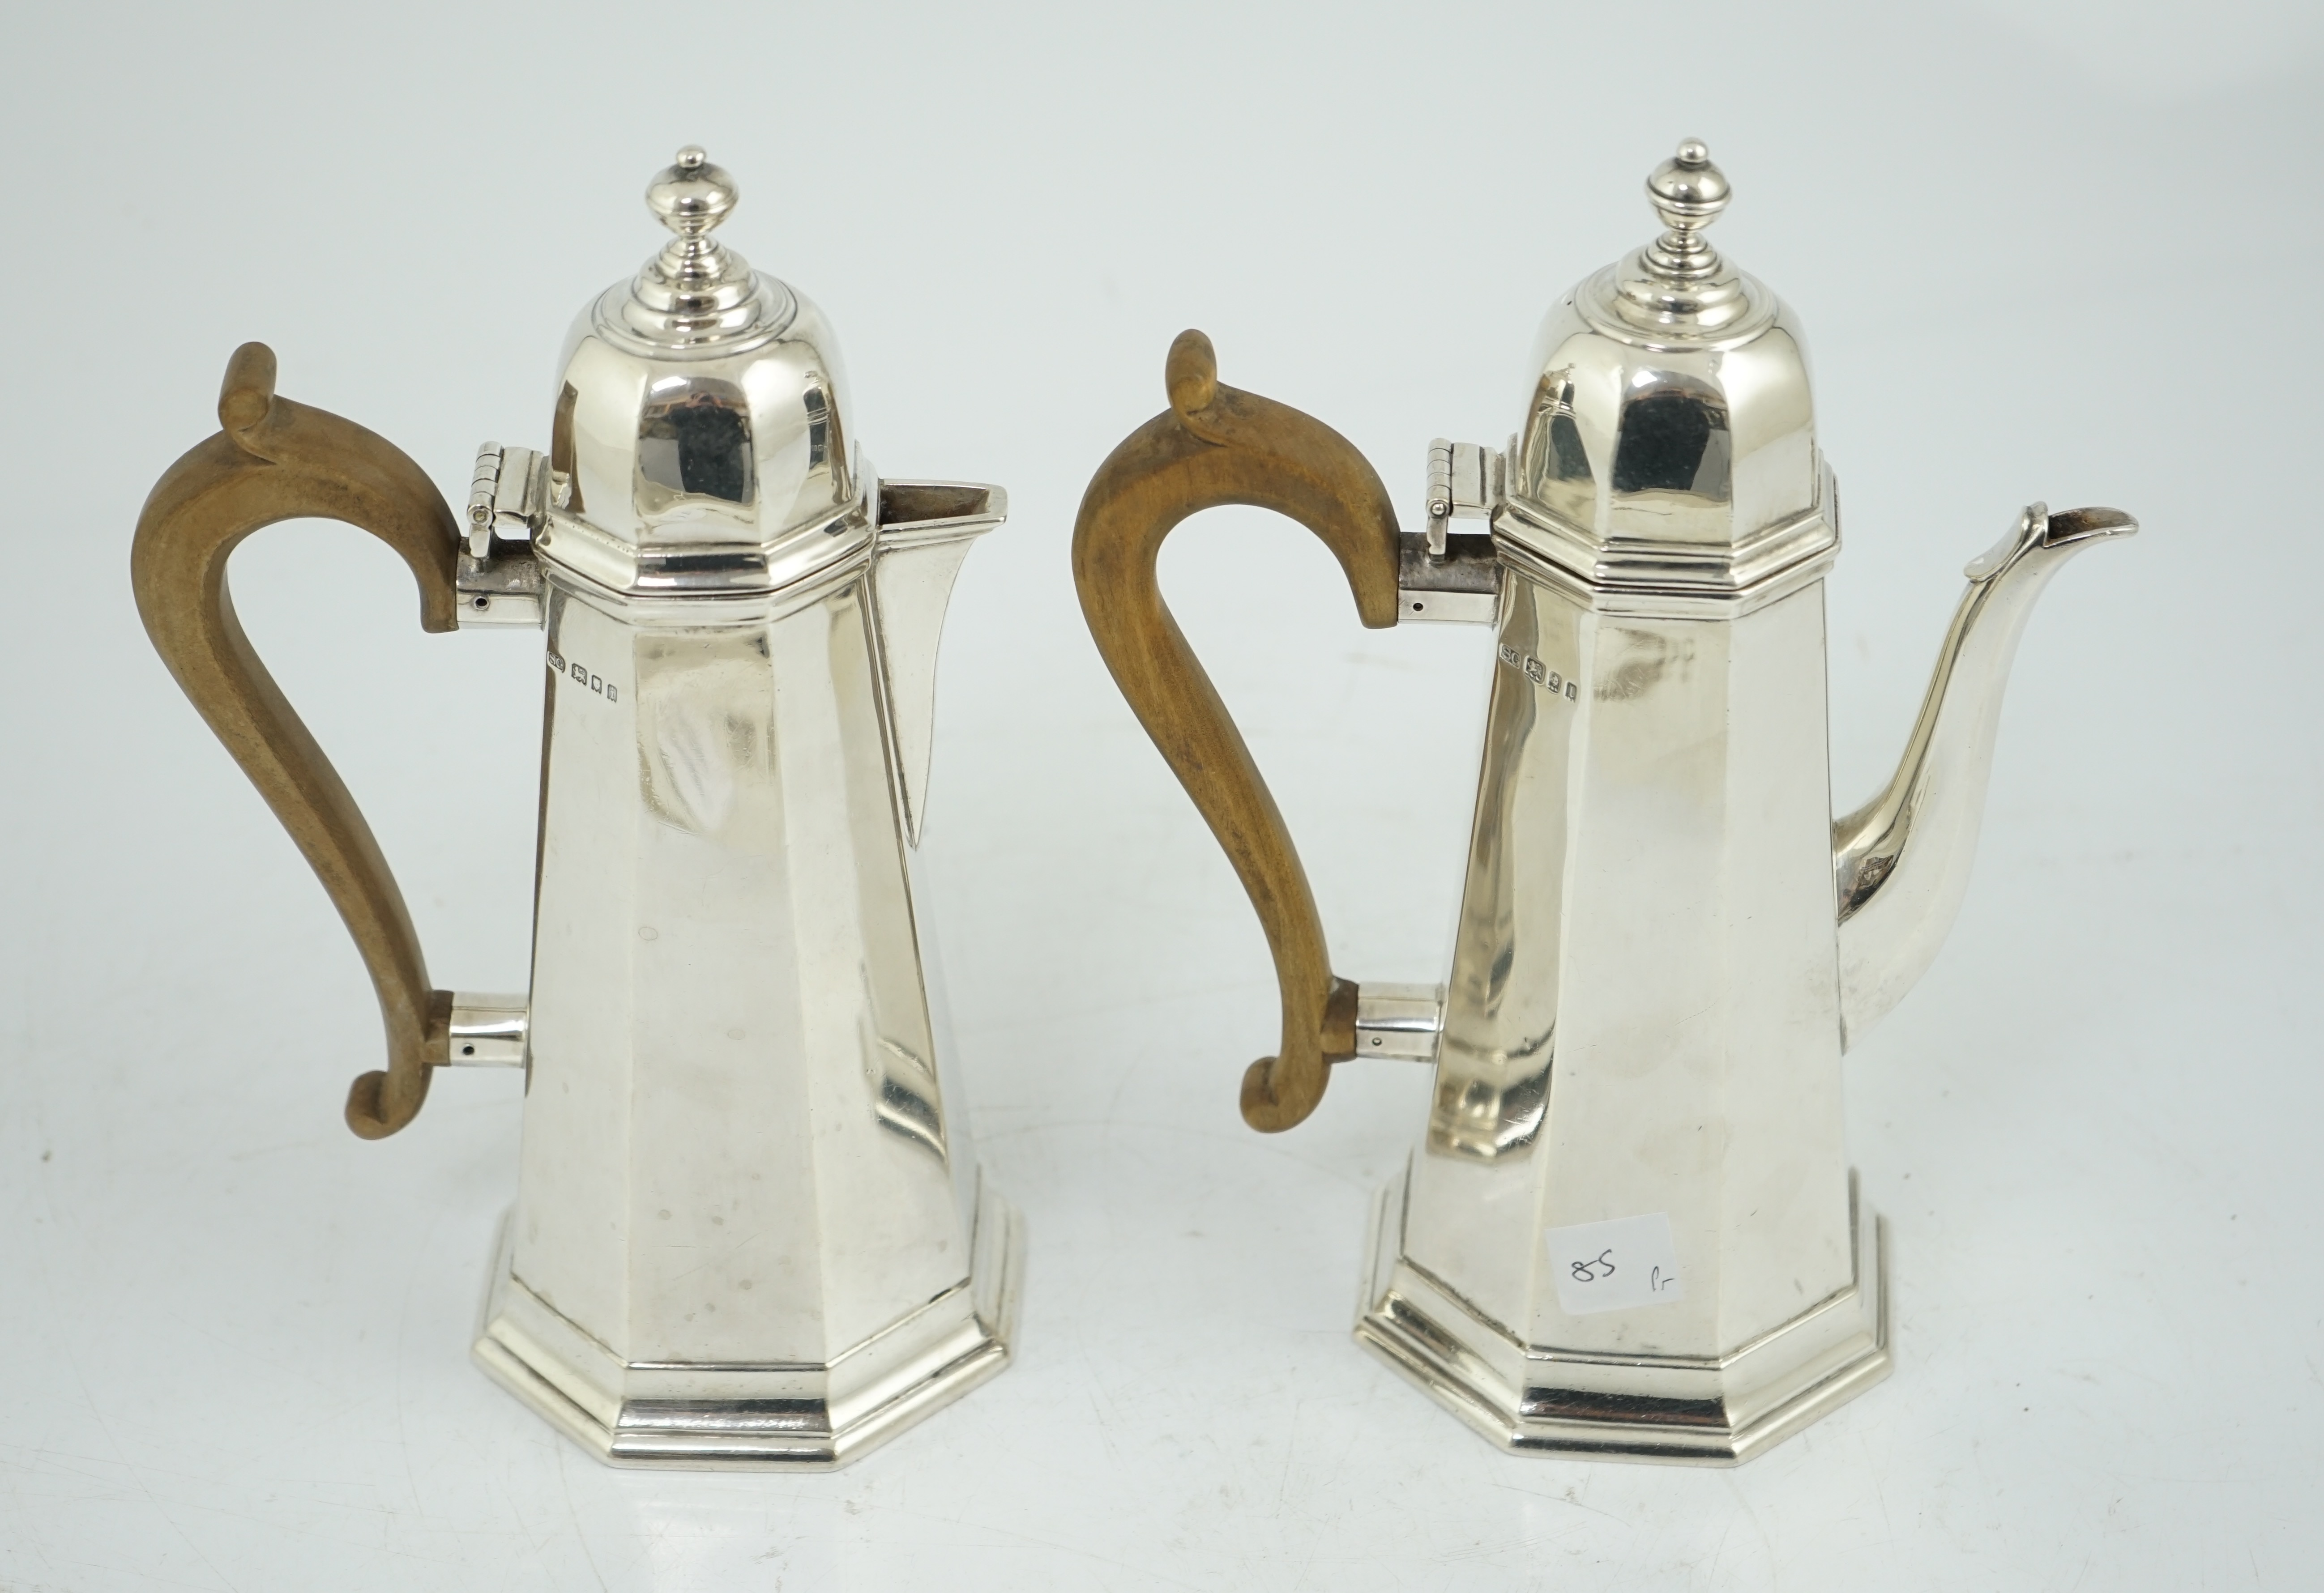 A George V 18th century style silver cafe au lait pair by Garrard & Co